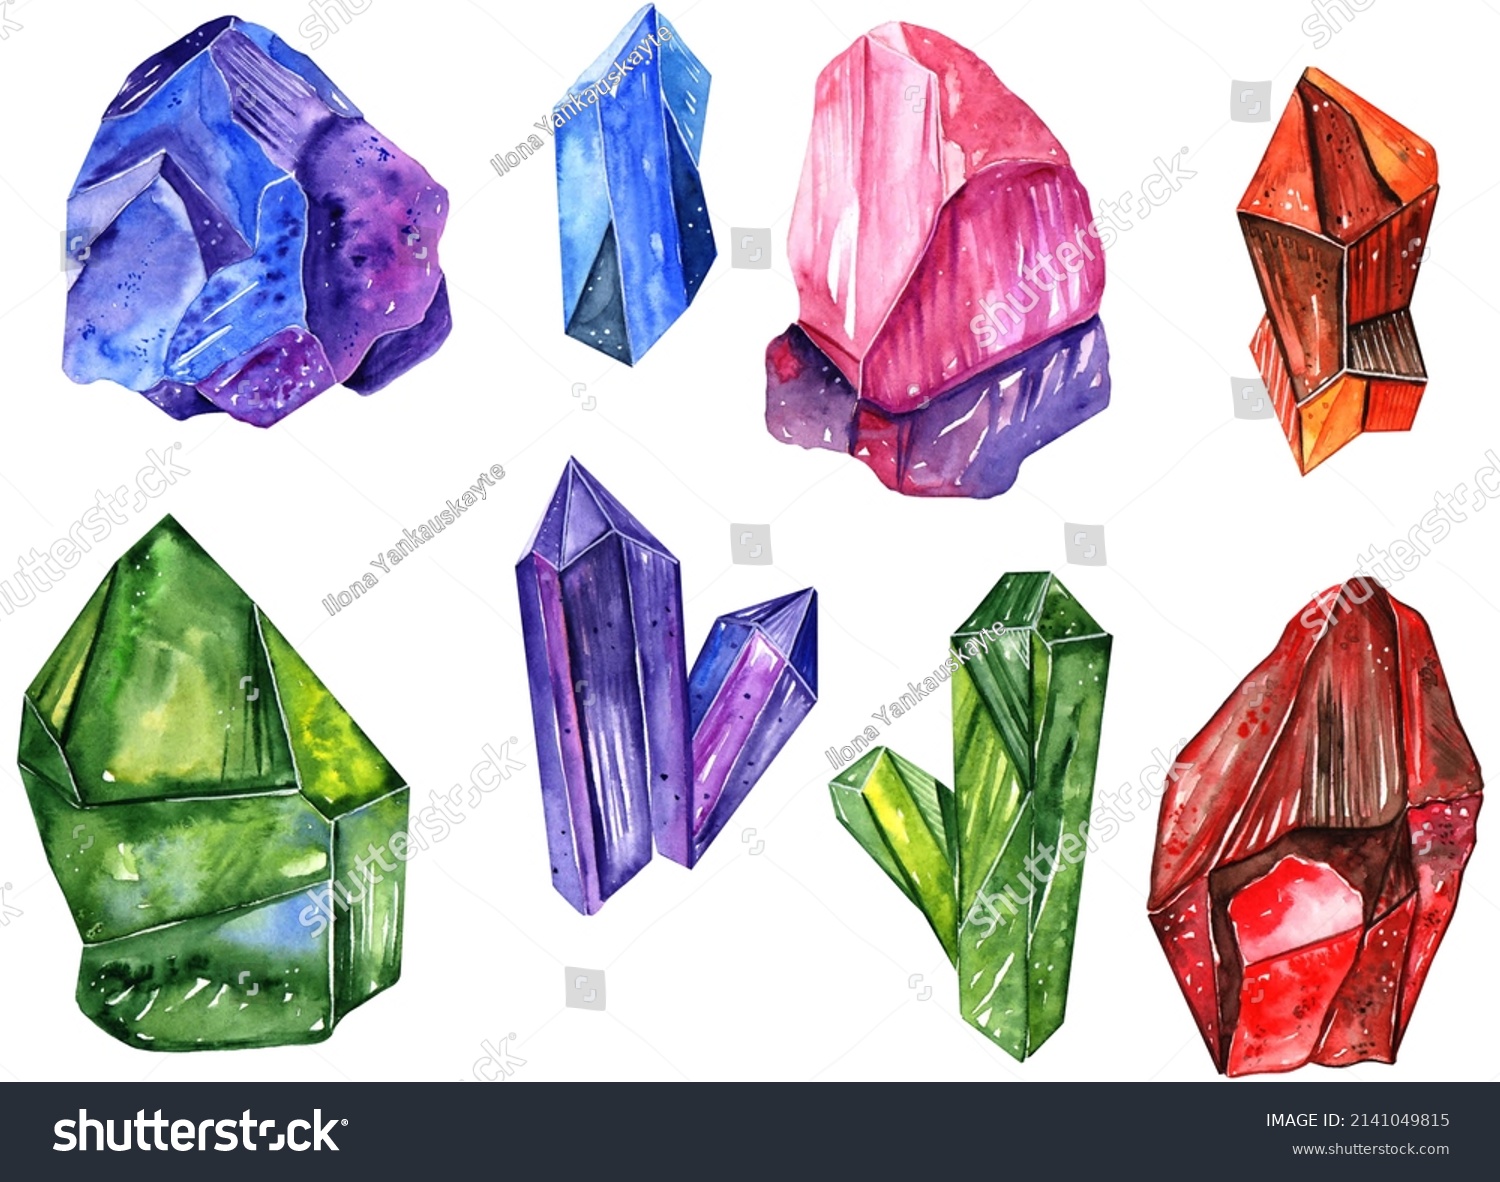 Hand Drawn Crystals Clipart Watercolor Illustration Stock Illustration ...